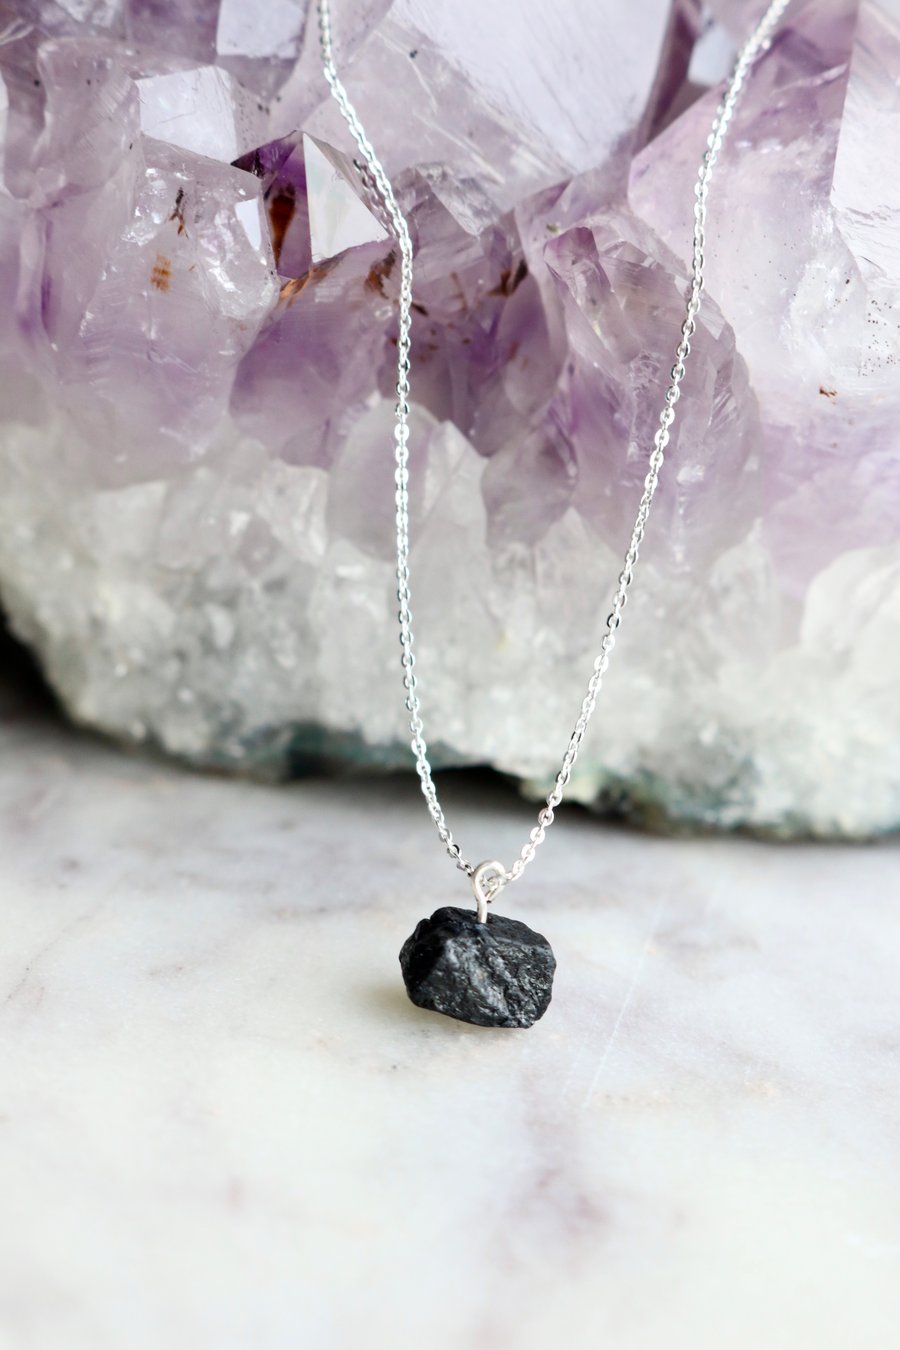 Raw Black Tourmaline Crystal Necklace, Sterling Silver Ethical Crystal Necklace